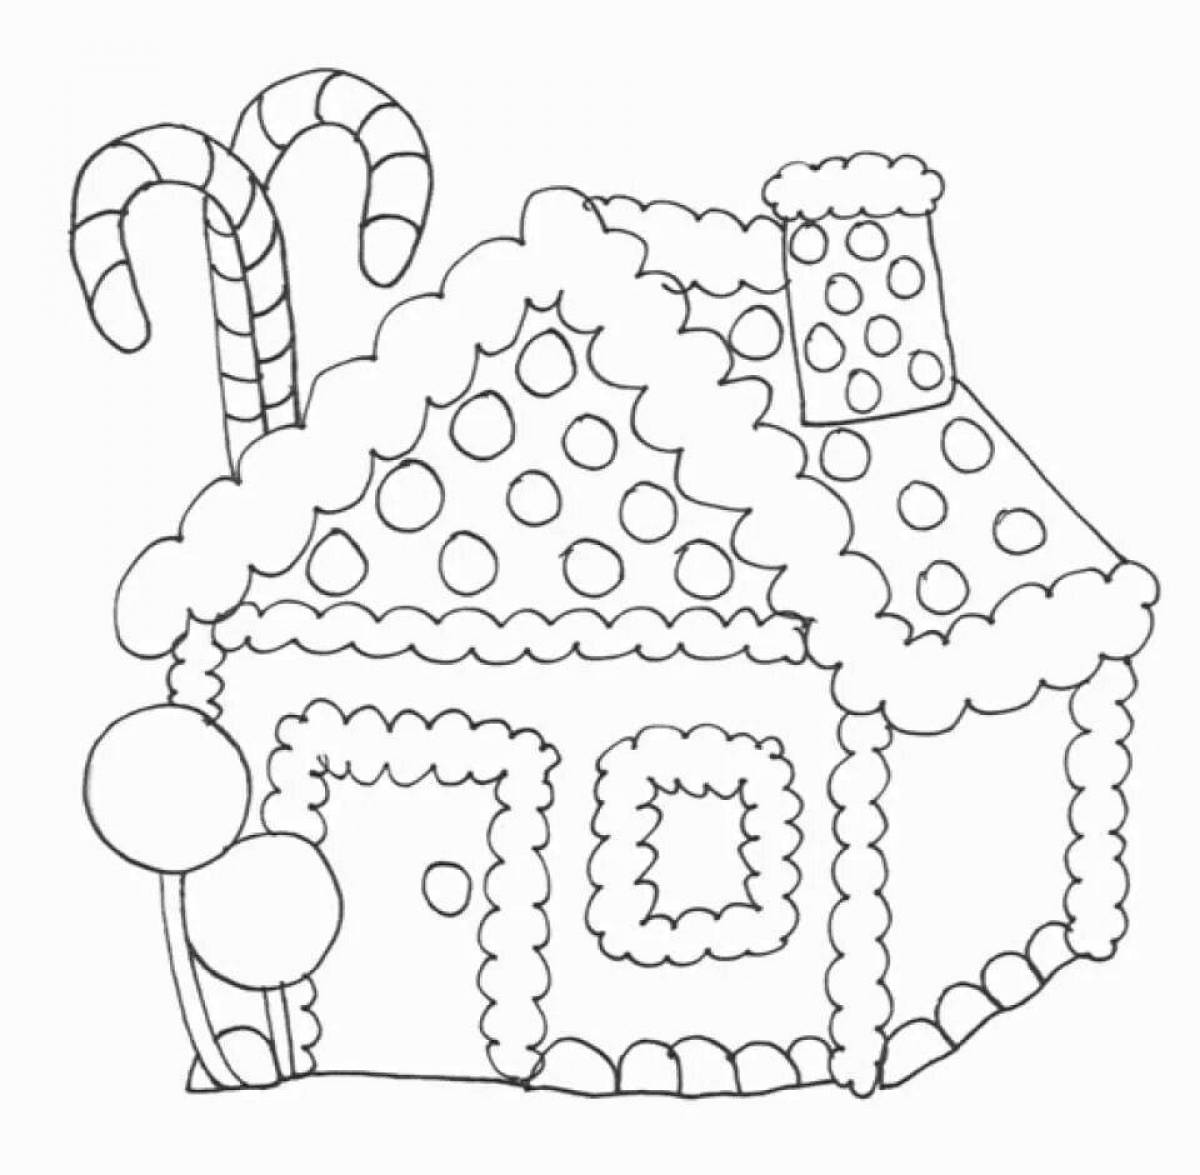 Fantastic Christmas coloring of the house